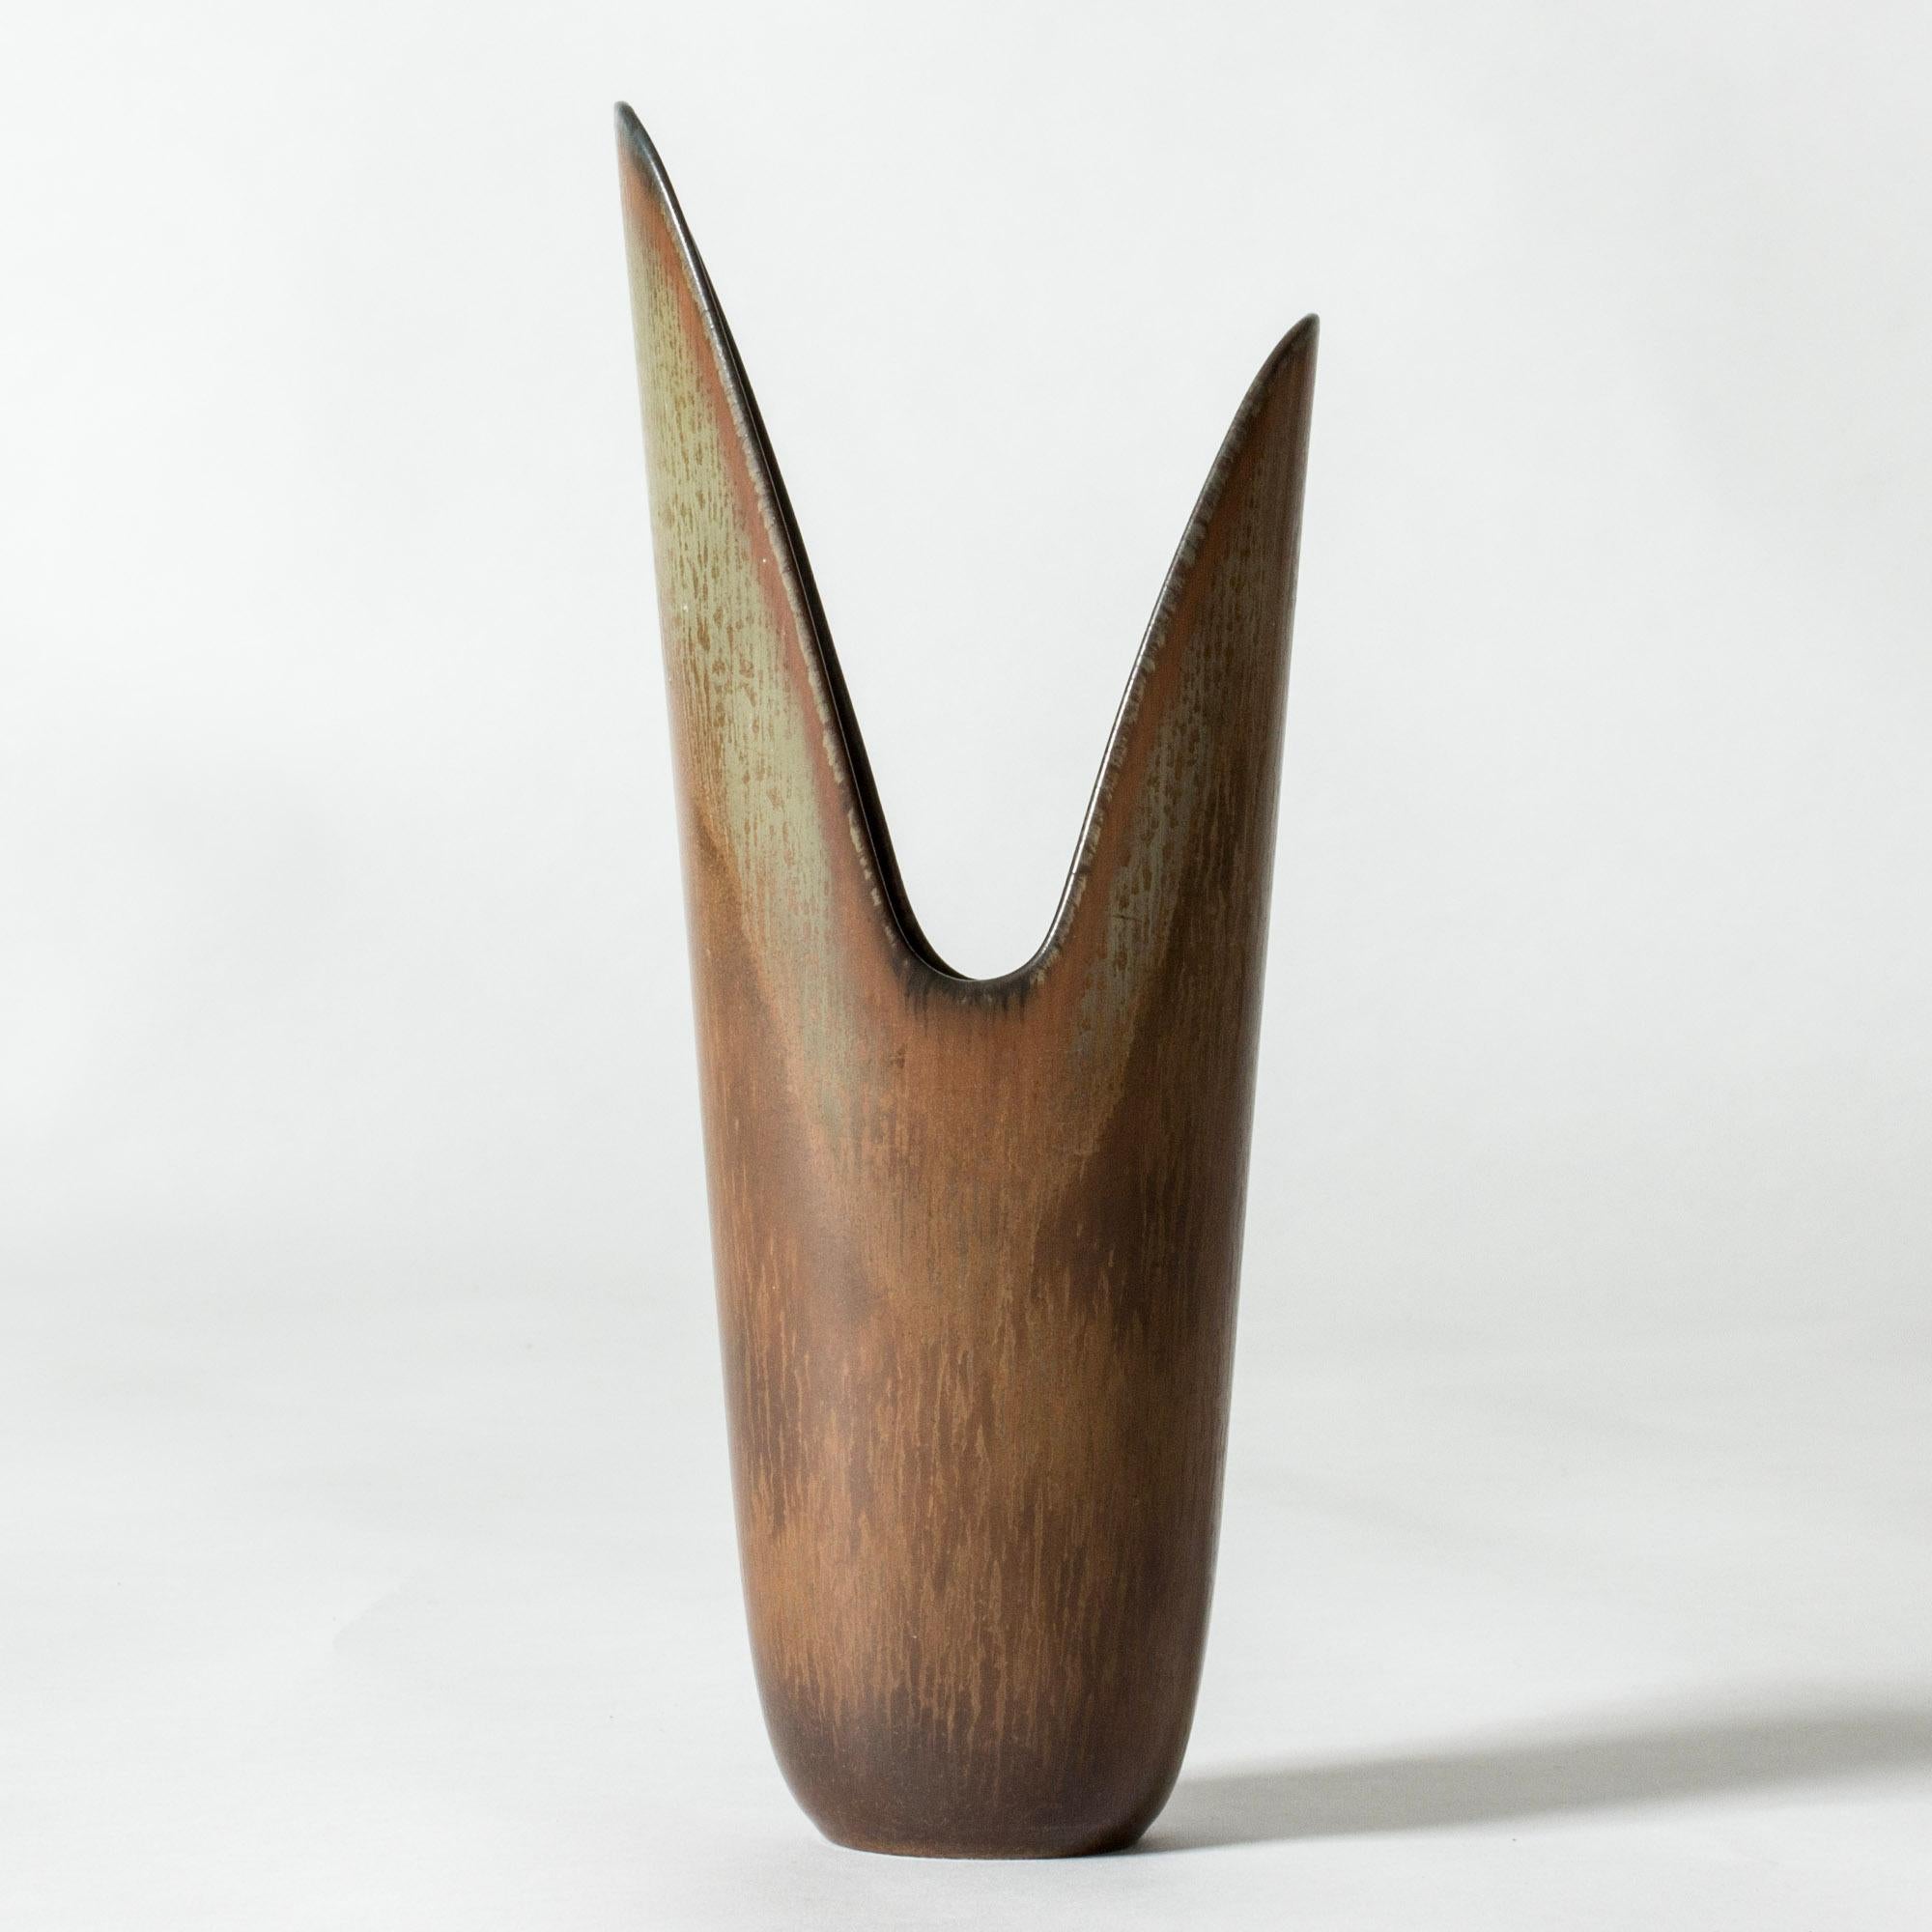 Striking stoneware vase by Gunnar Nylund, in a bold asymmetric form, sometimes called the Nylund “Pike” vase. Brown and greenish glaze in an organic pattern.

Gunnar Nylund was one of the most influential ceramicists and designers of the Swedish